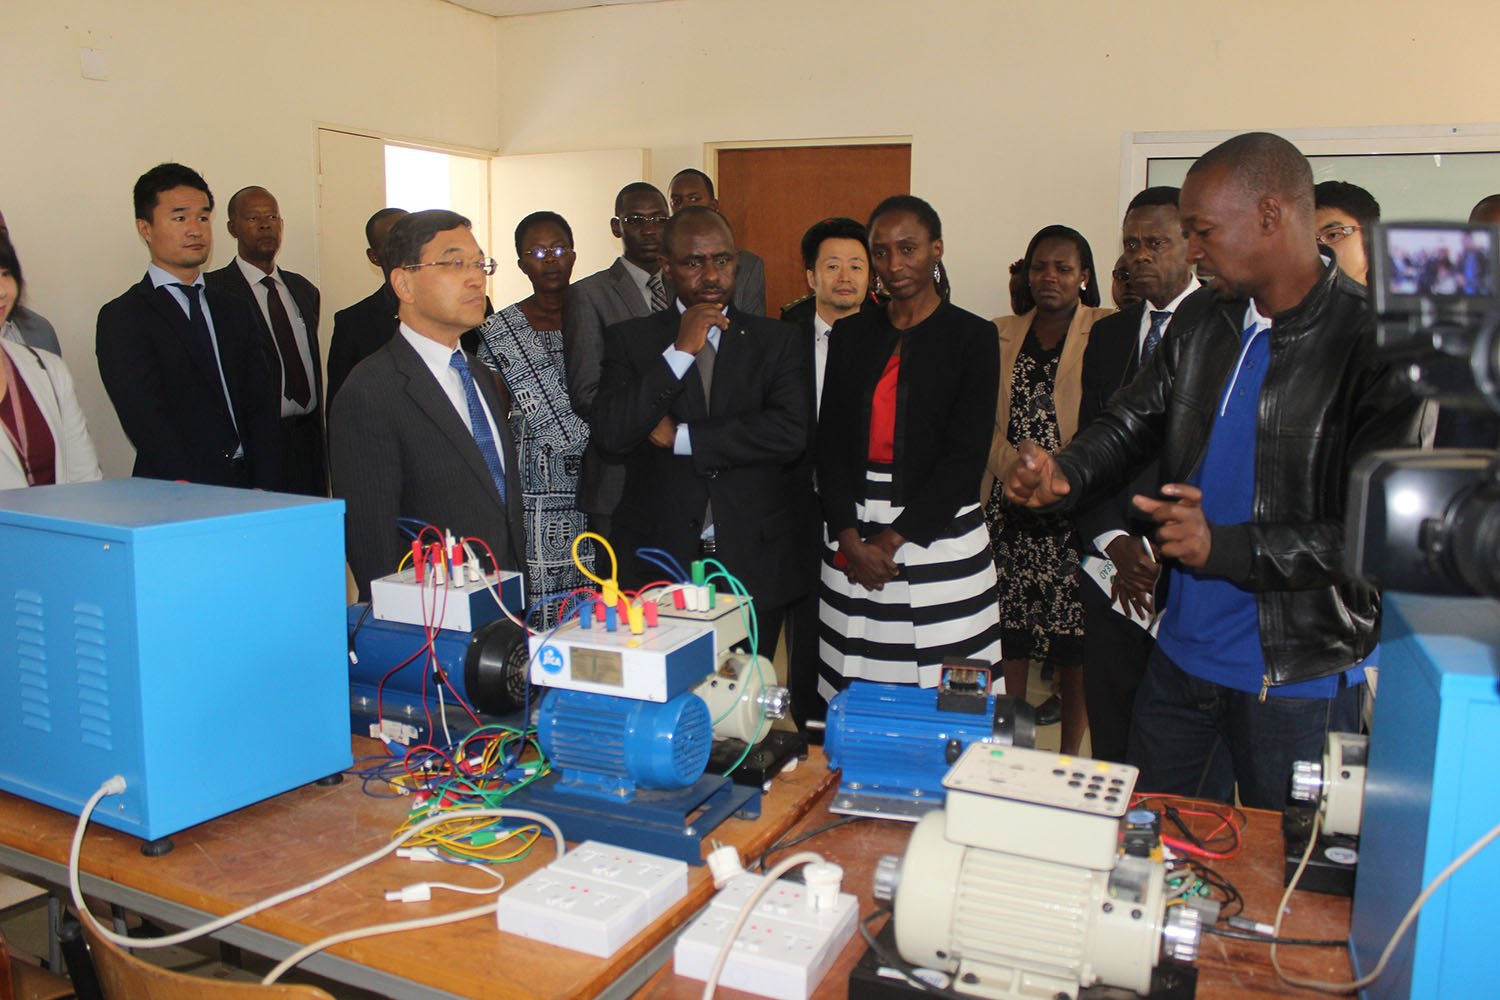 A baboratory technician from IPRC Tumba briefs officials on how some machines operate.